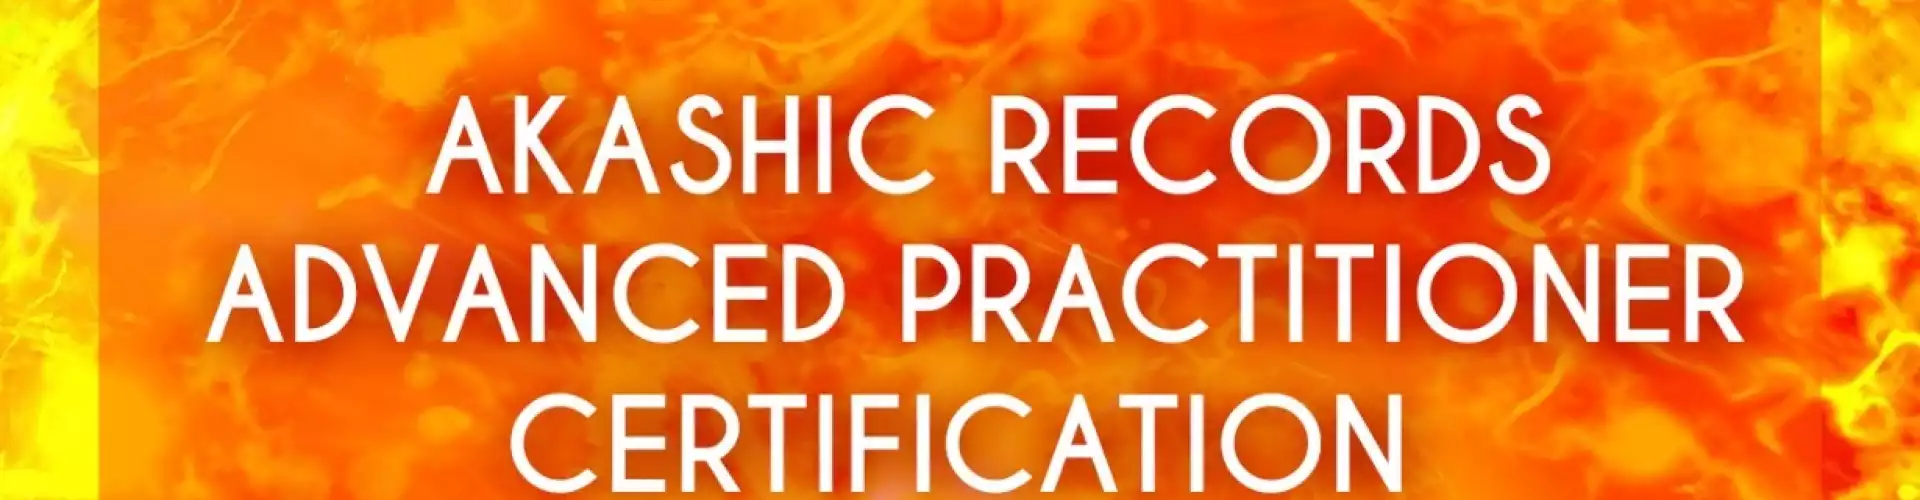 Akashic Records Advanced Practitioner Certification